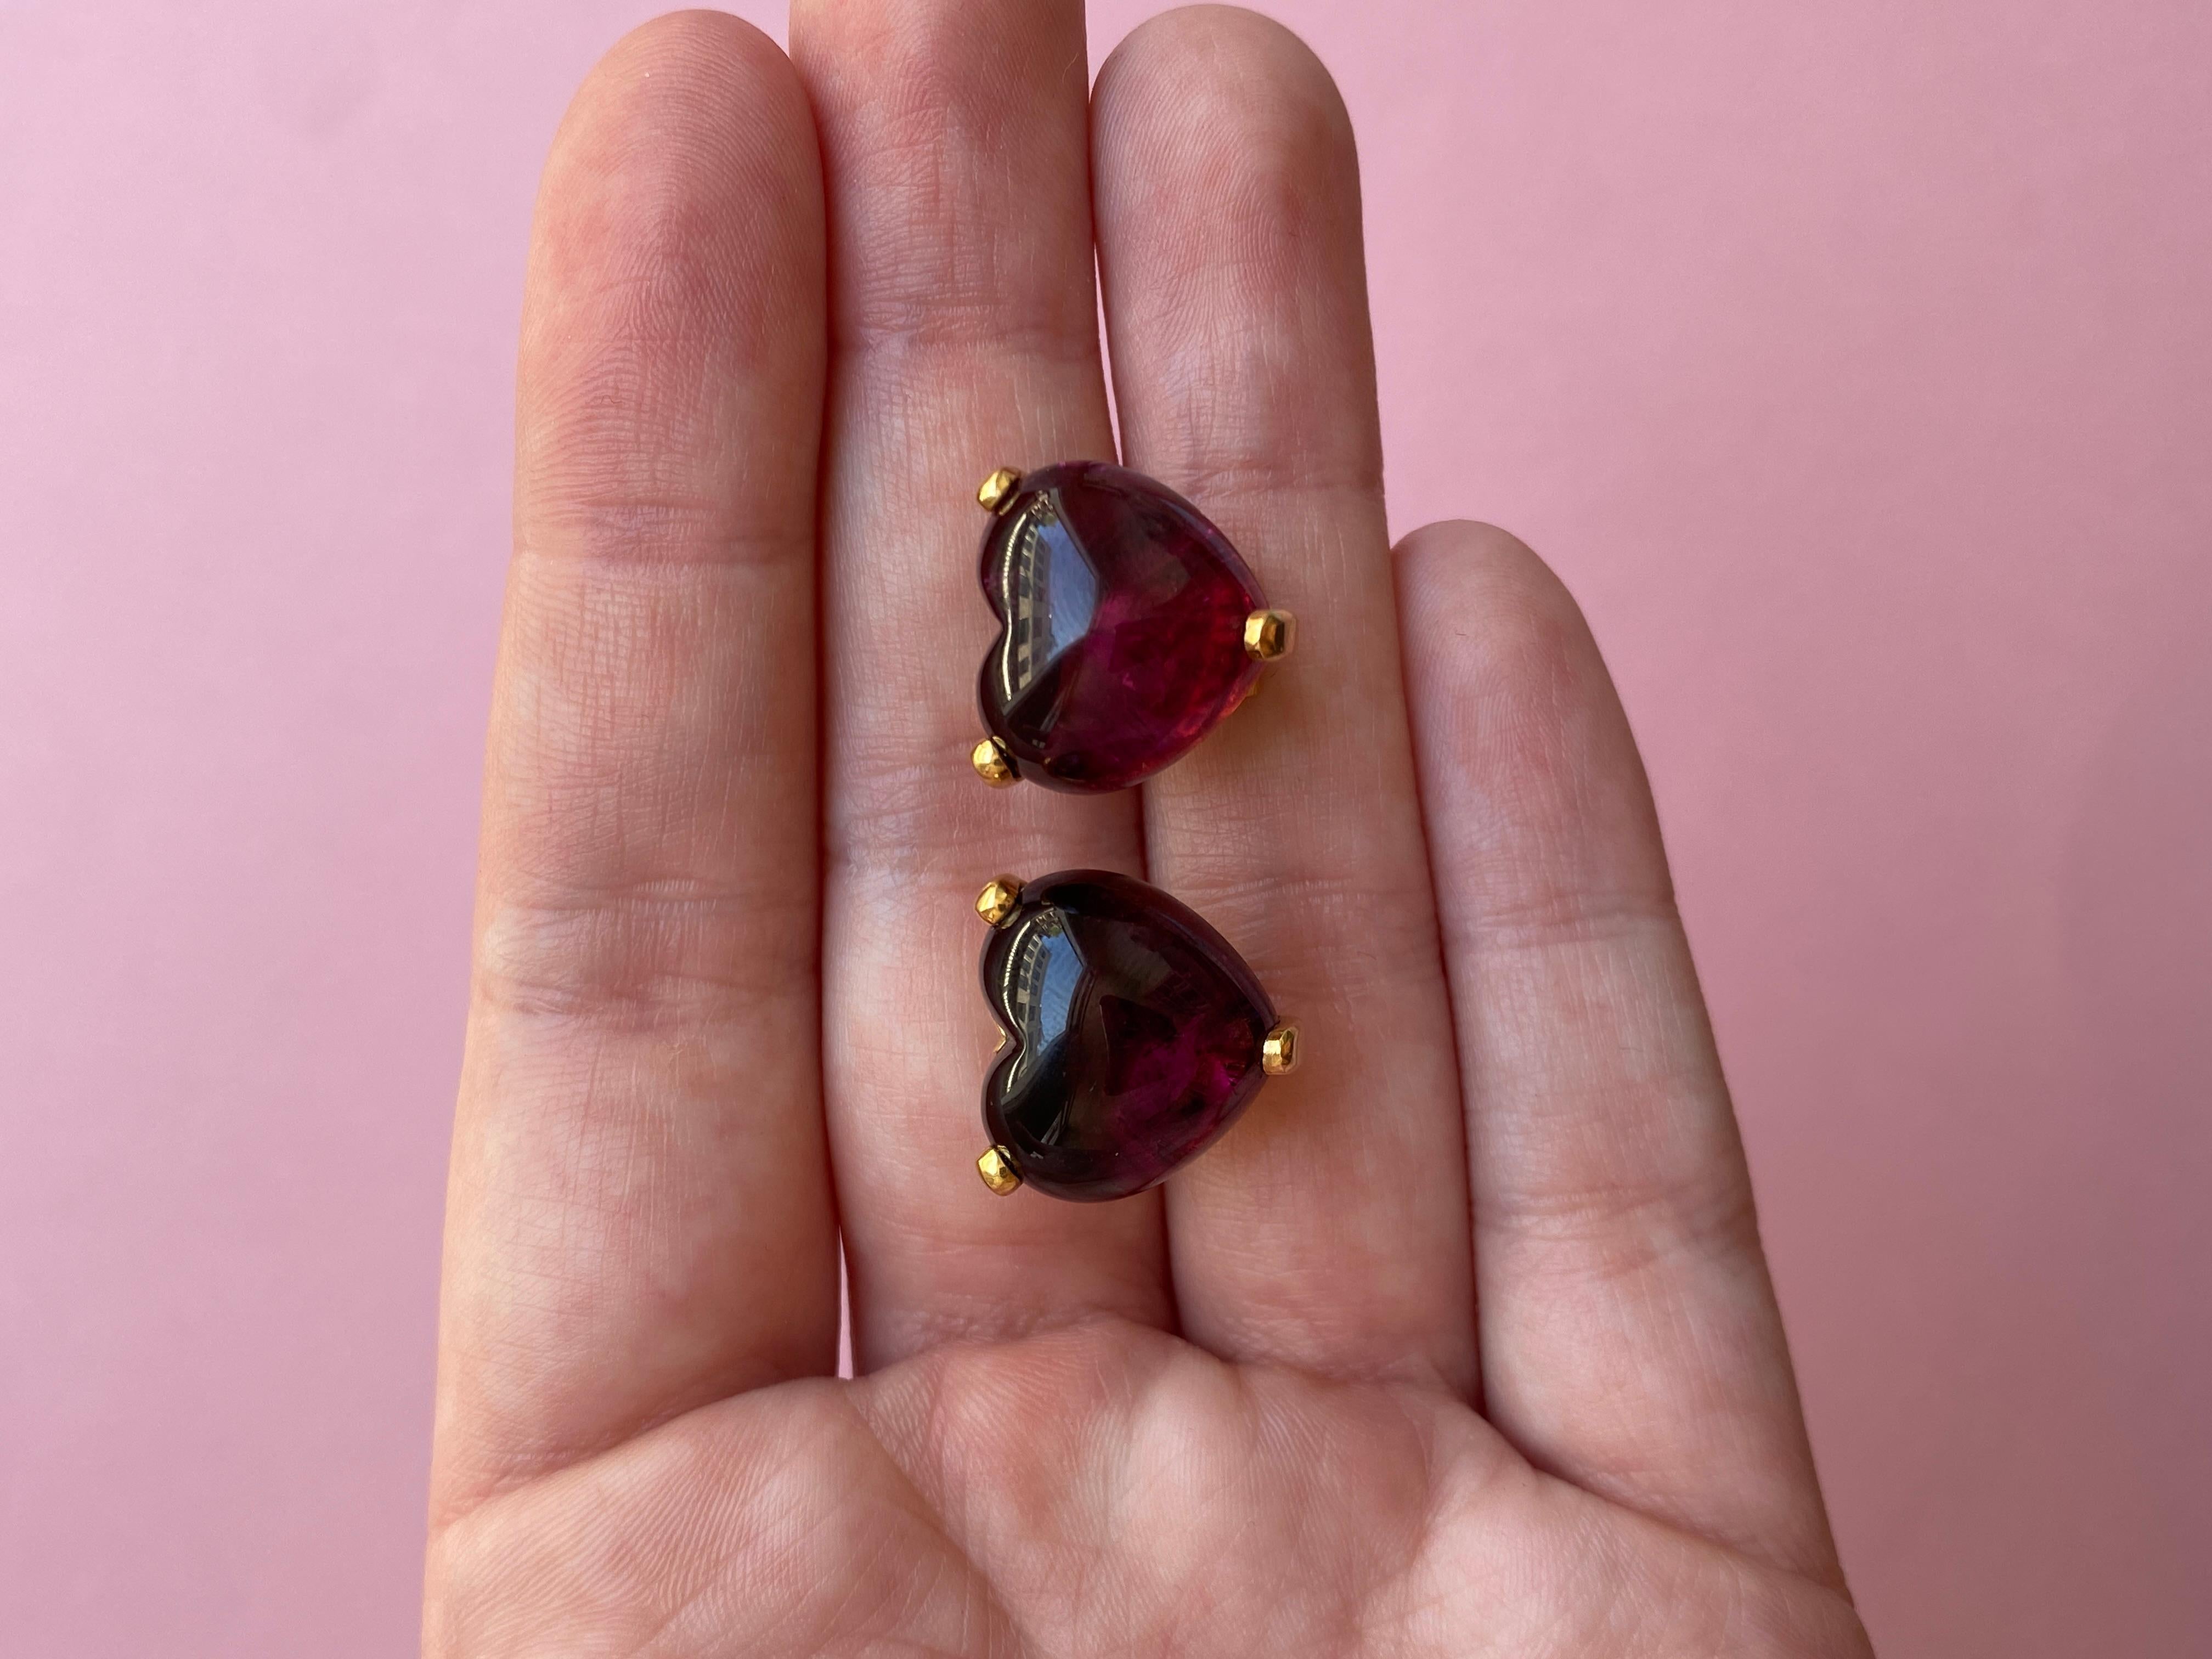 Heart Cut A Pair of 18 Carat Gold Heart Earrings with Pink Tourmalines